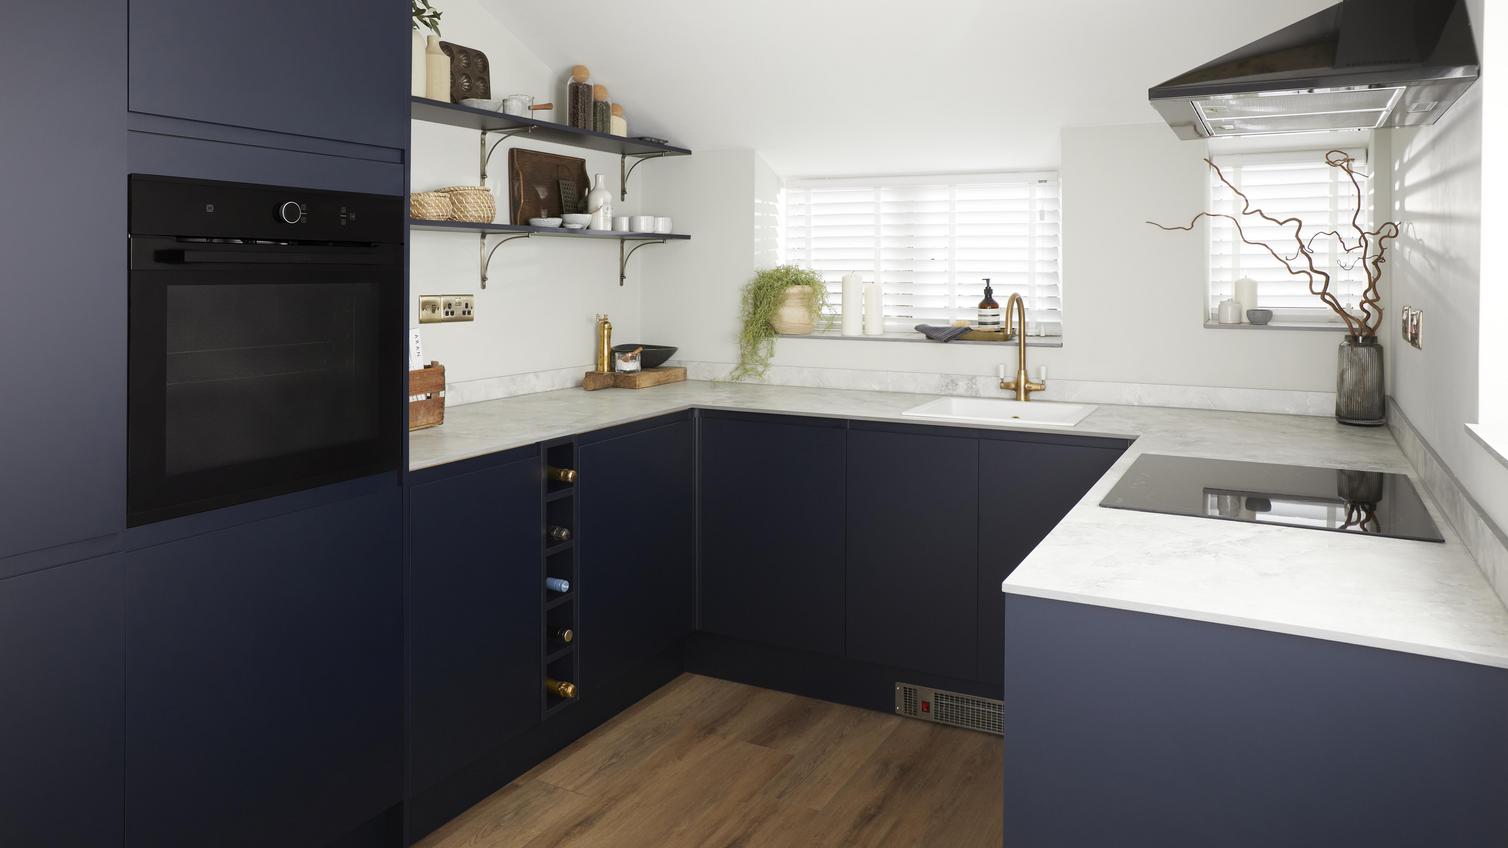 U-shaped navy kitchen, with white marble-style laminate worktop and integrated appliances.